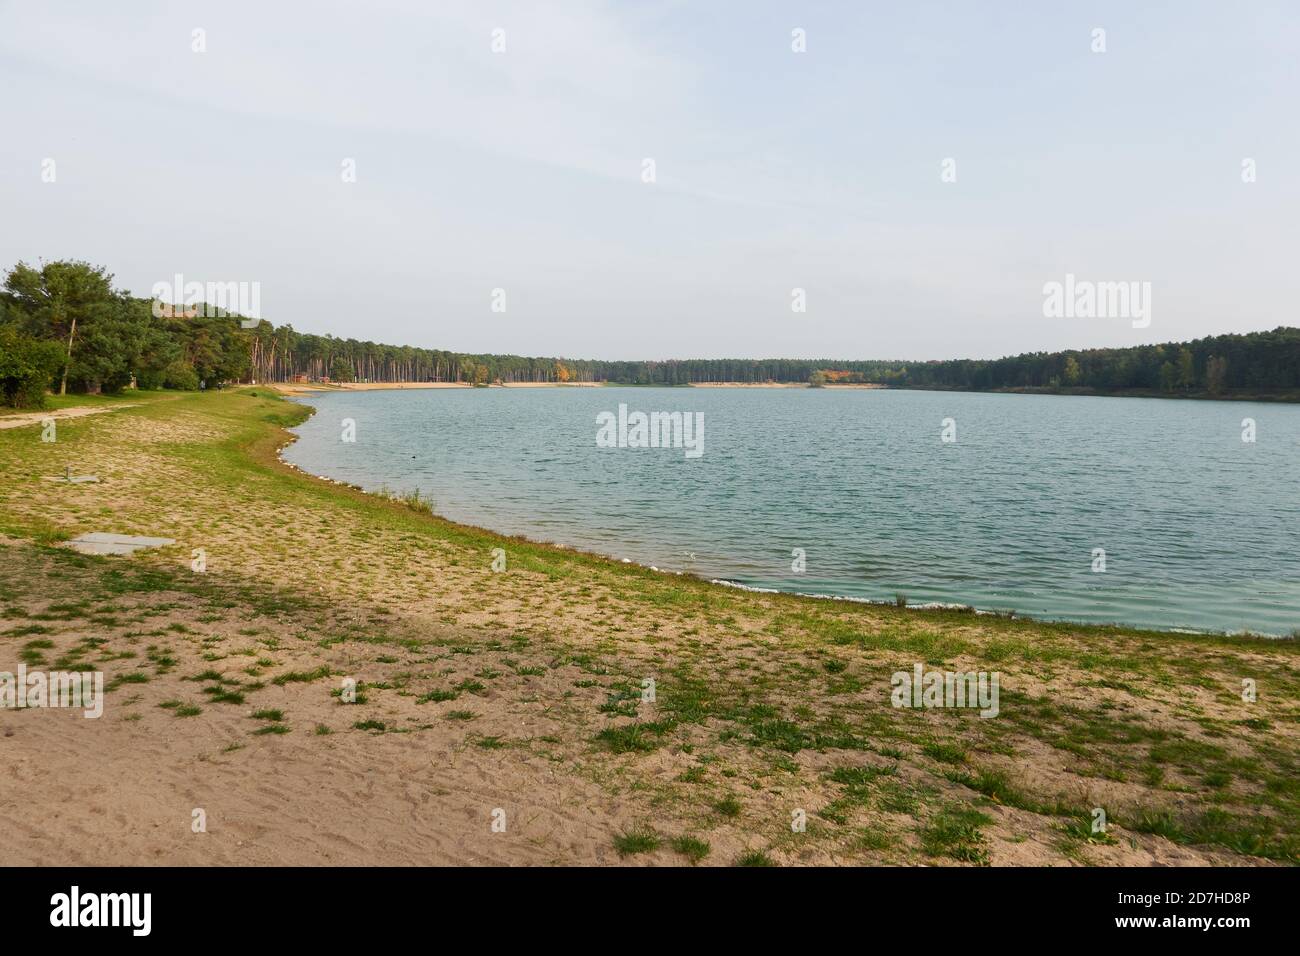 Autumn afternoon on the beach of a beautiful lake - September 2020 Stock Photo